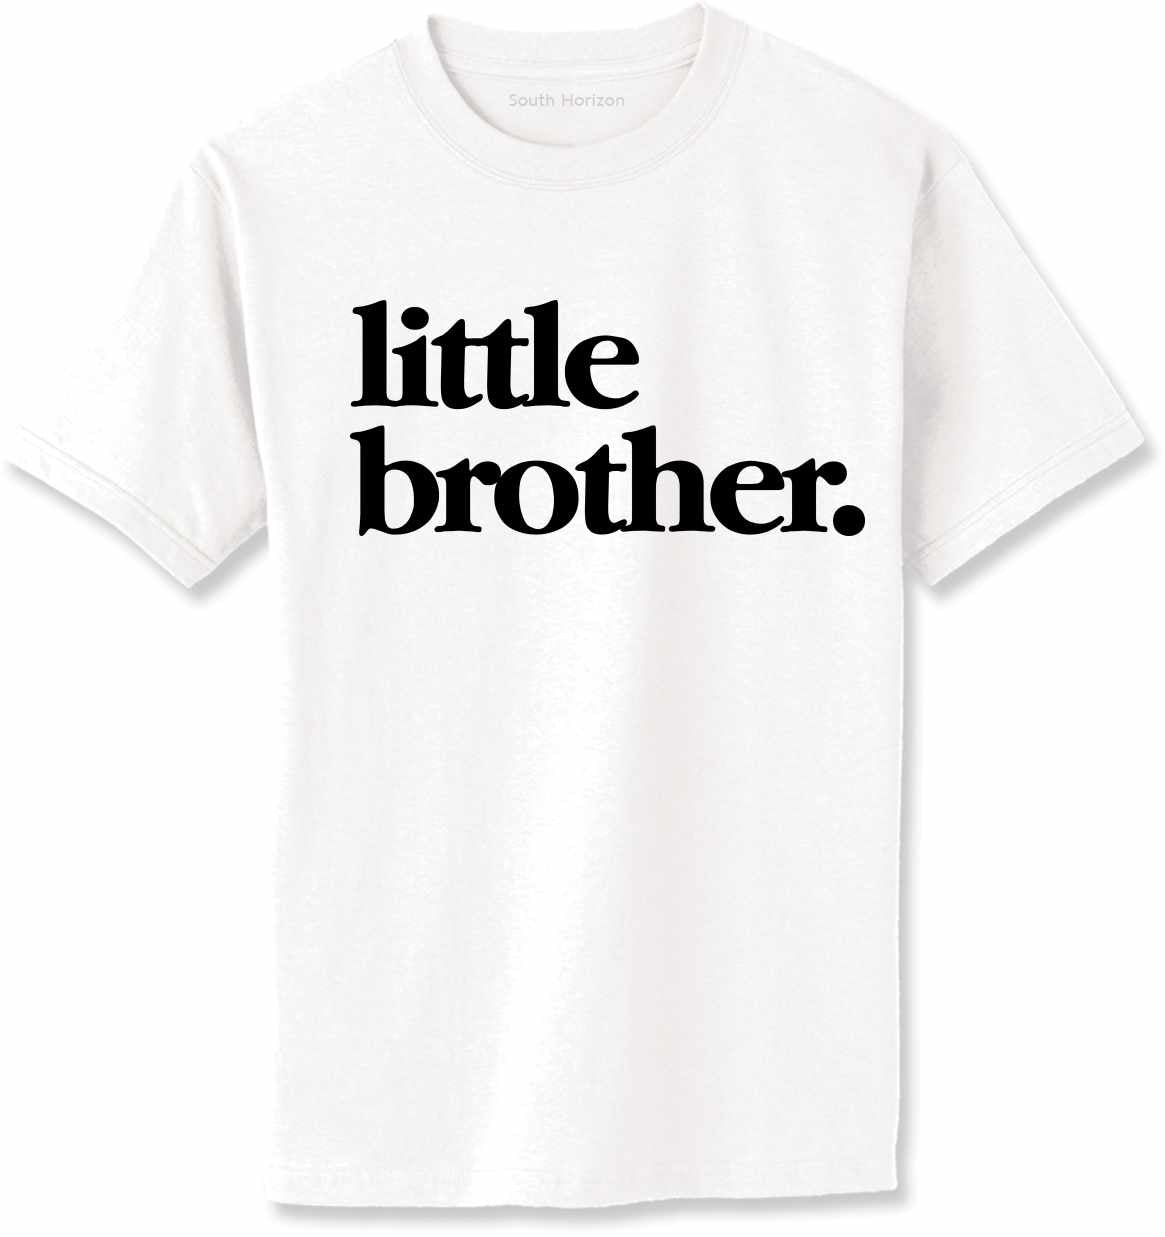 Little Brother on Adult T-Shirt (#1322-1)